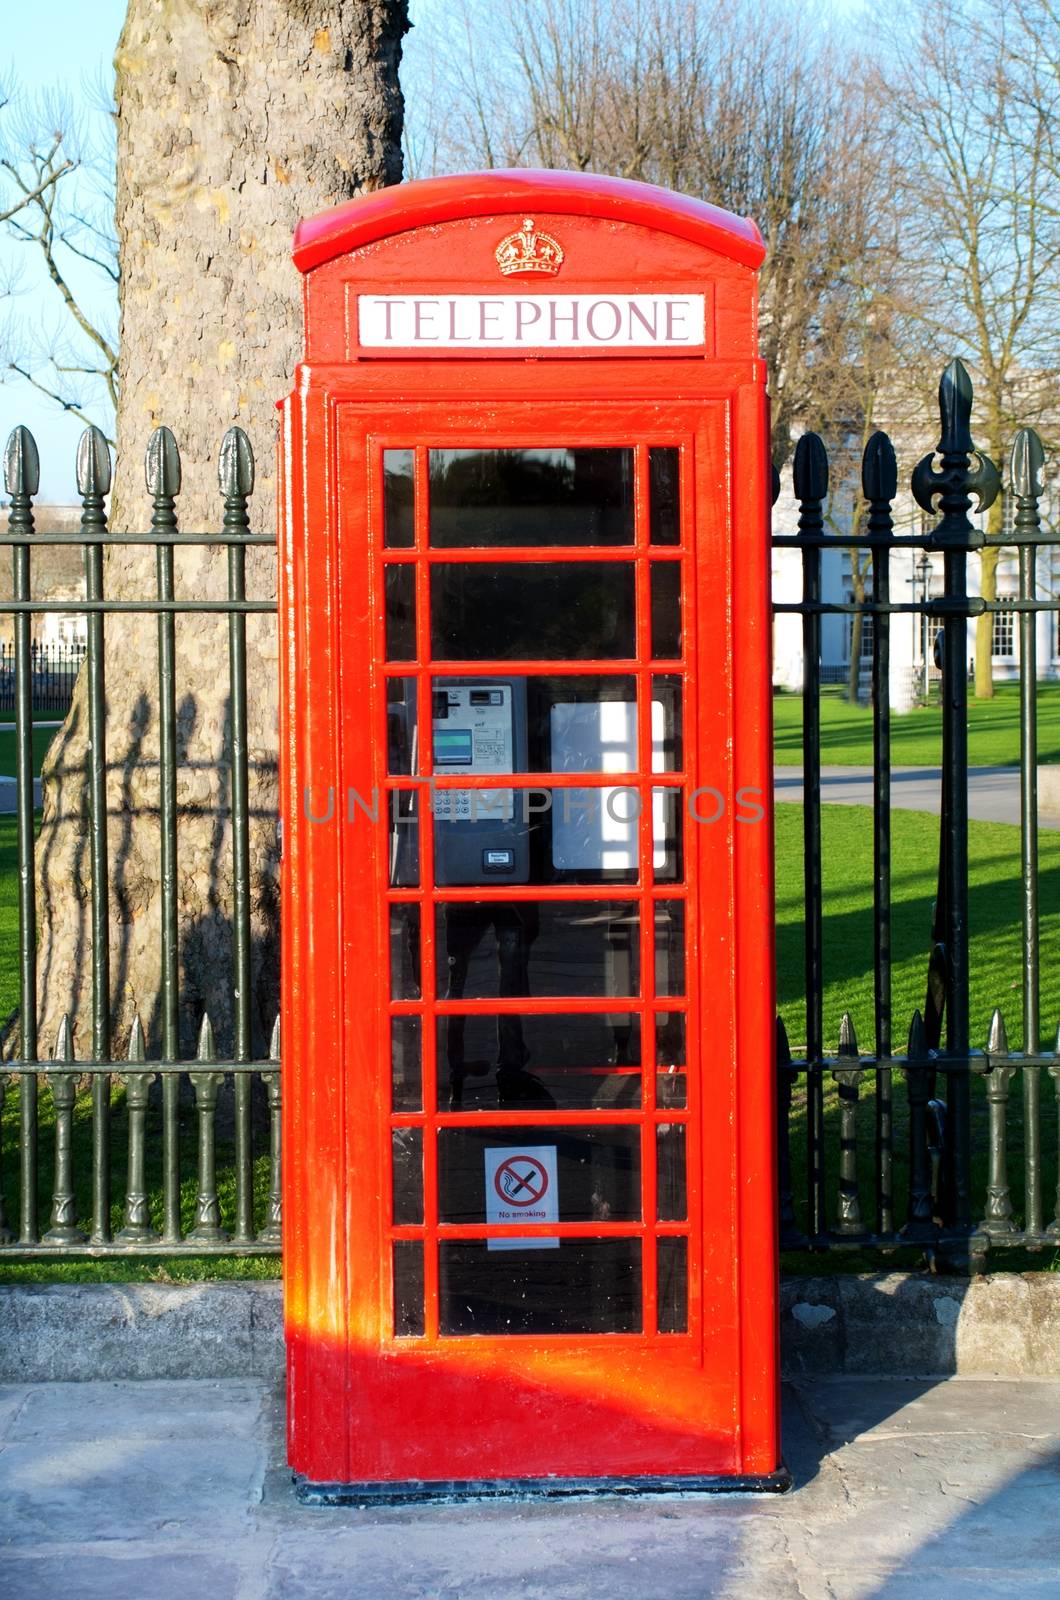 The iconic red phone in London